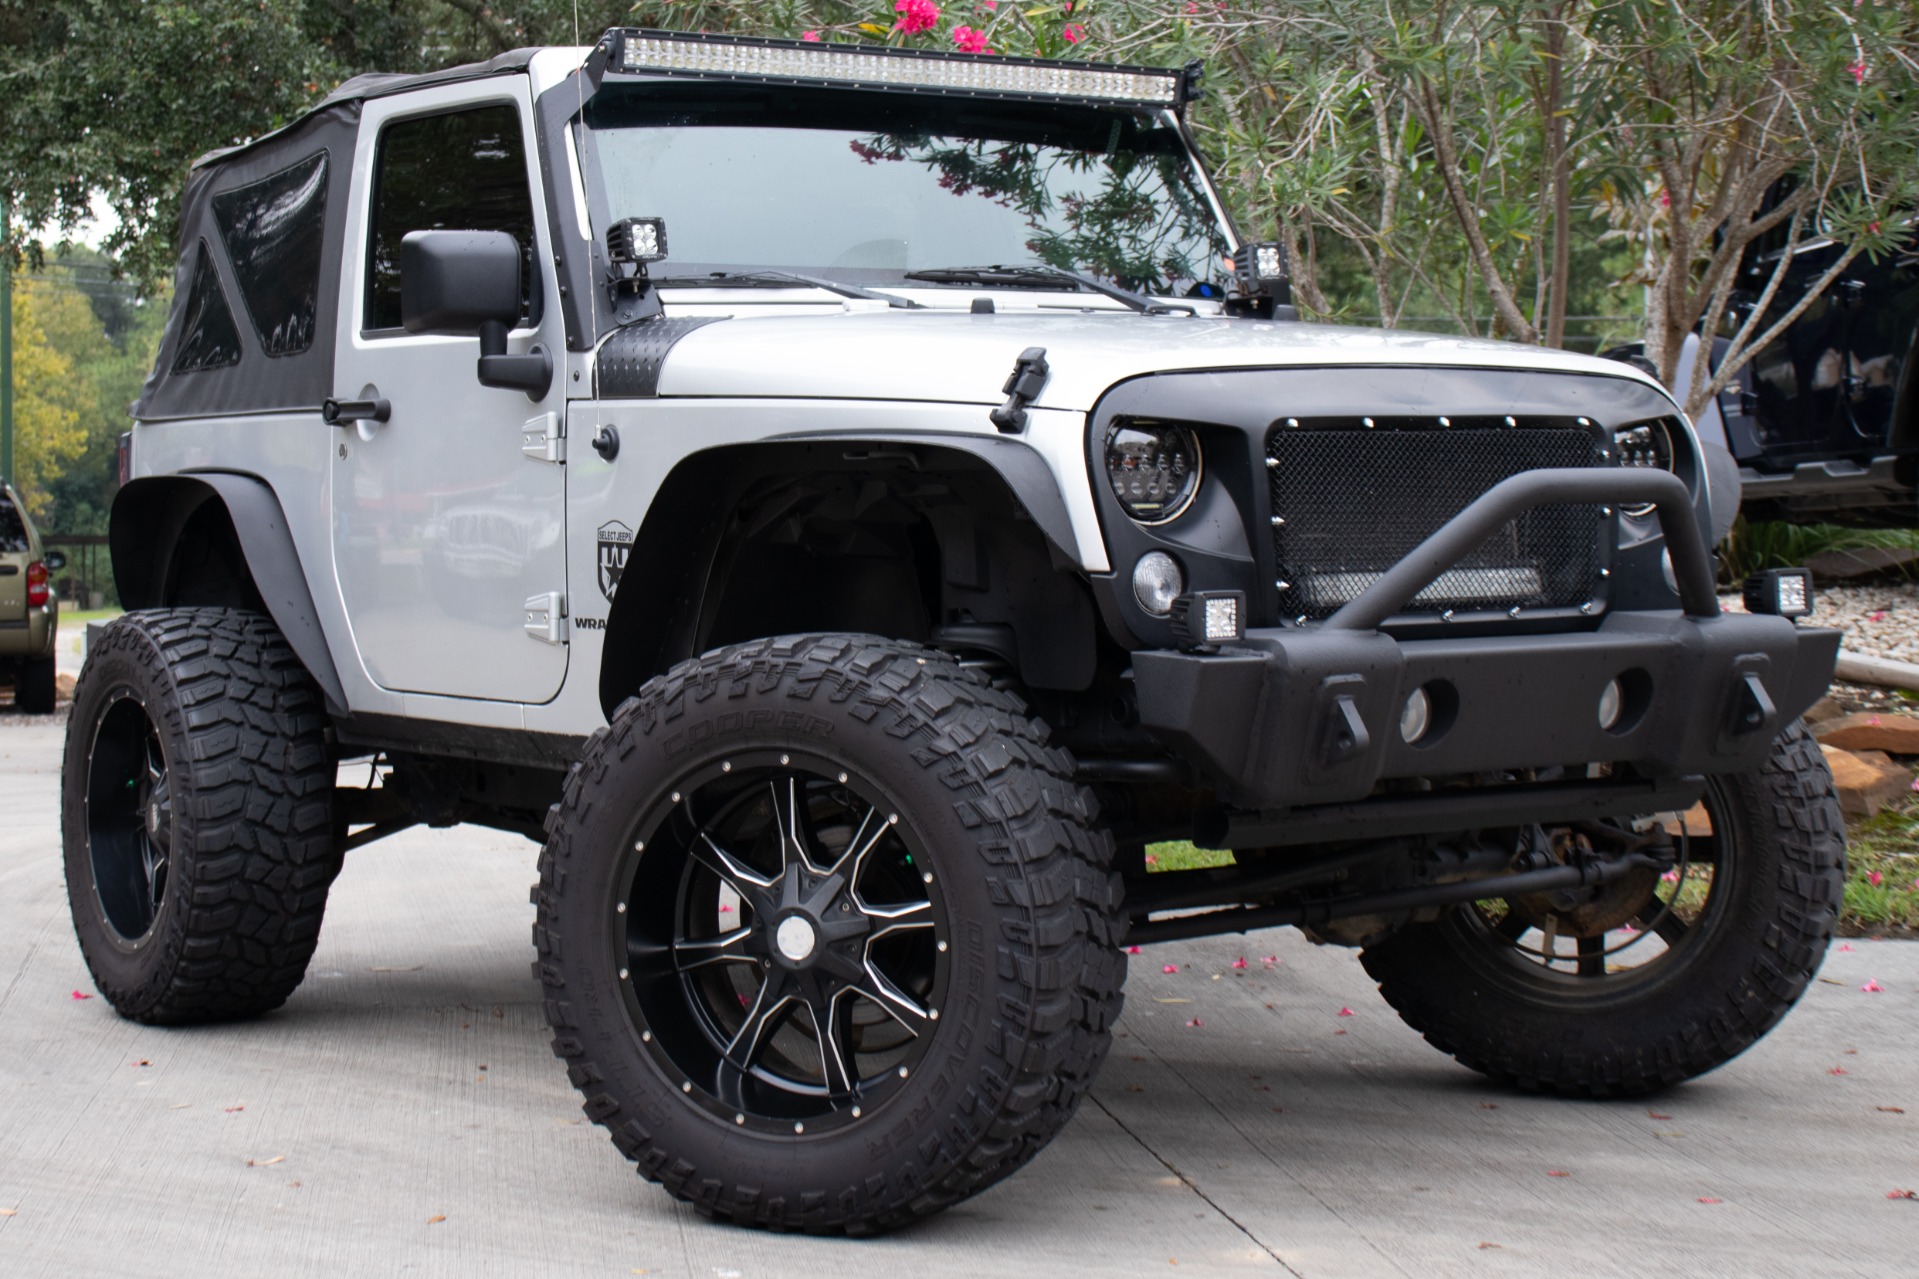 Used 2008 Jeep Wrangler X For Sale ($15,995) | Select Jeeps Inc 